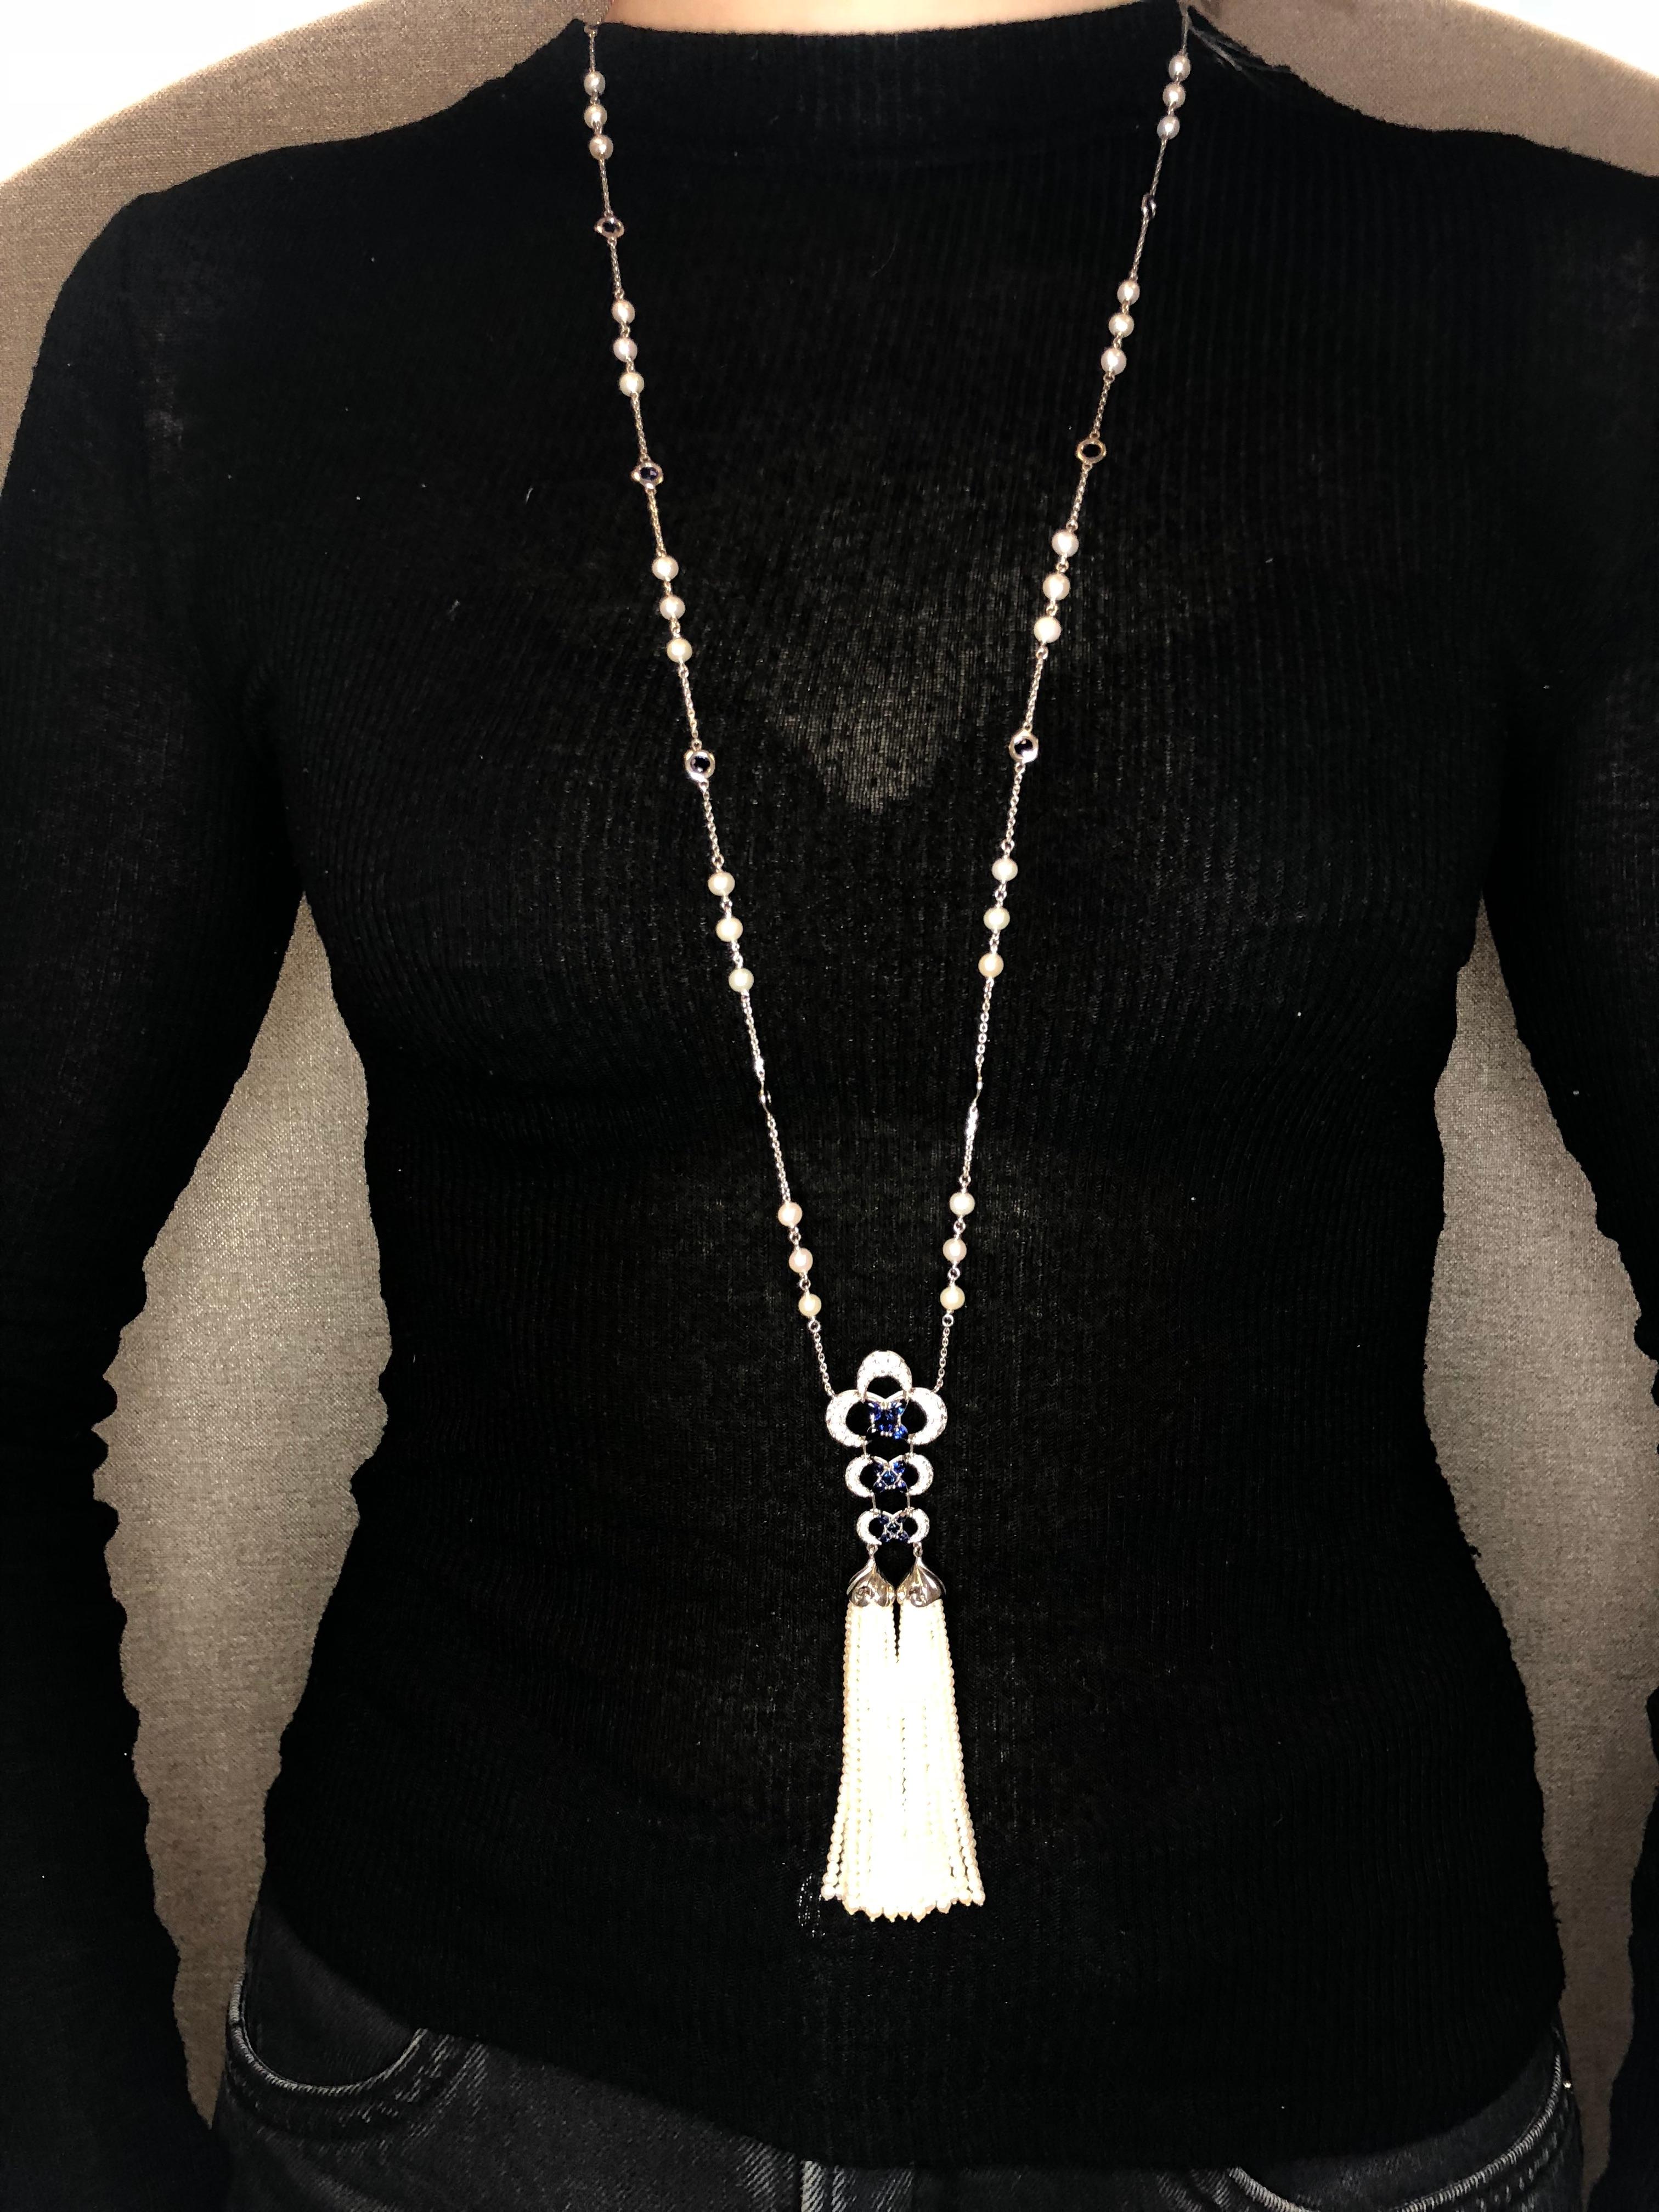 A beautiful Blue Sapphire and Diamond Lariat Necklace with Freshwater Pearl Tassel Handcrafted in 18k White Gold. This necklace features 1.80 carats of White Diamonds and 2.25 carats of Blue Sapphires with hand strung Freshwater Pearl Tassels. The